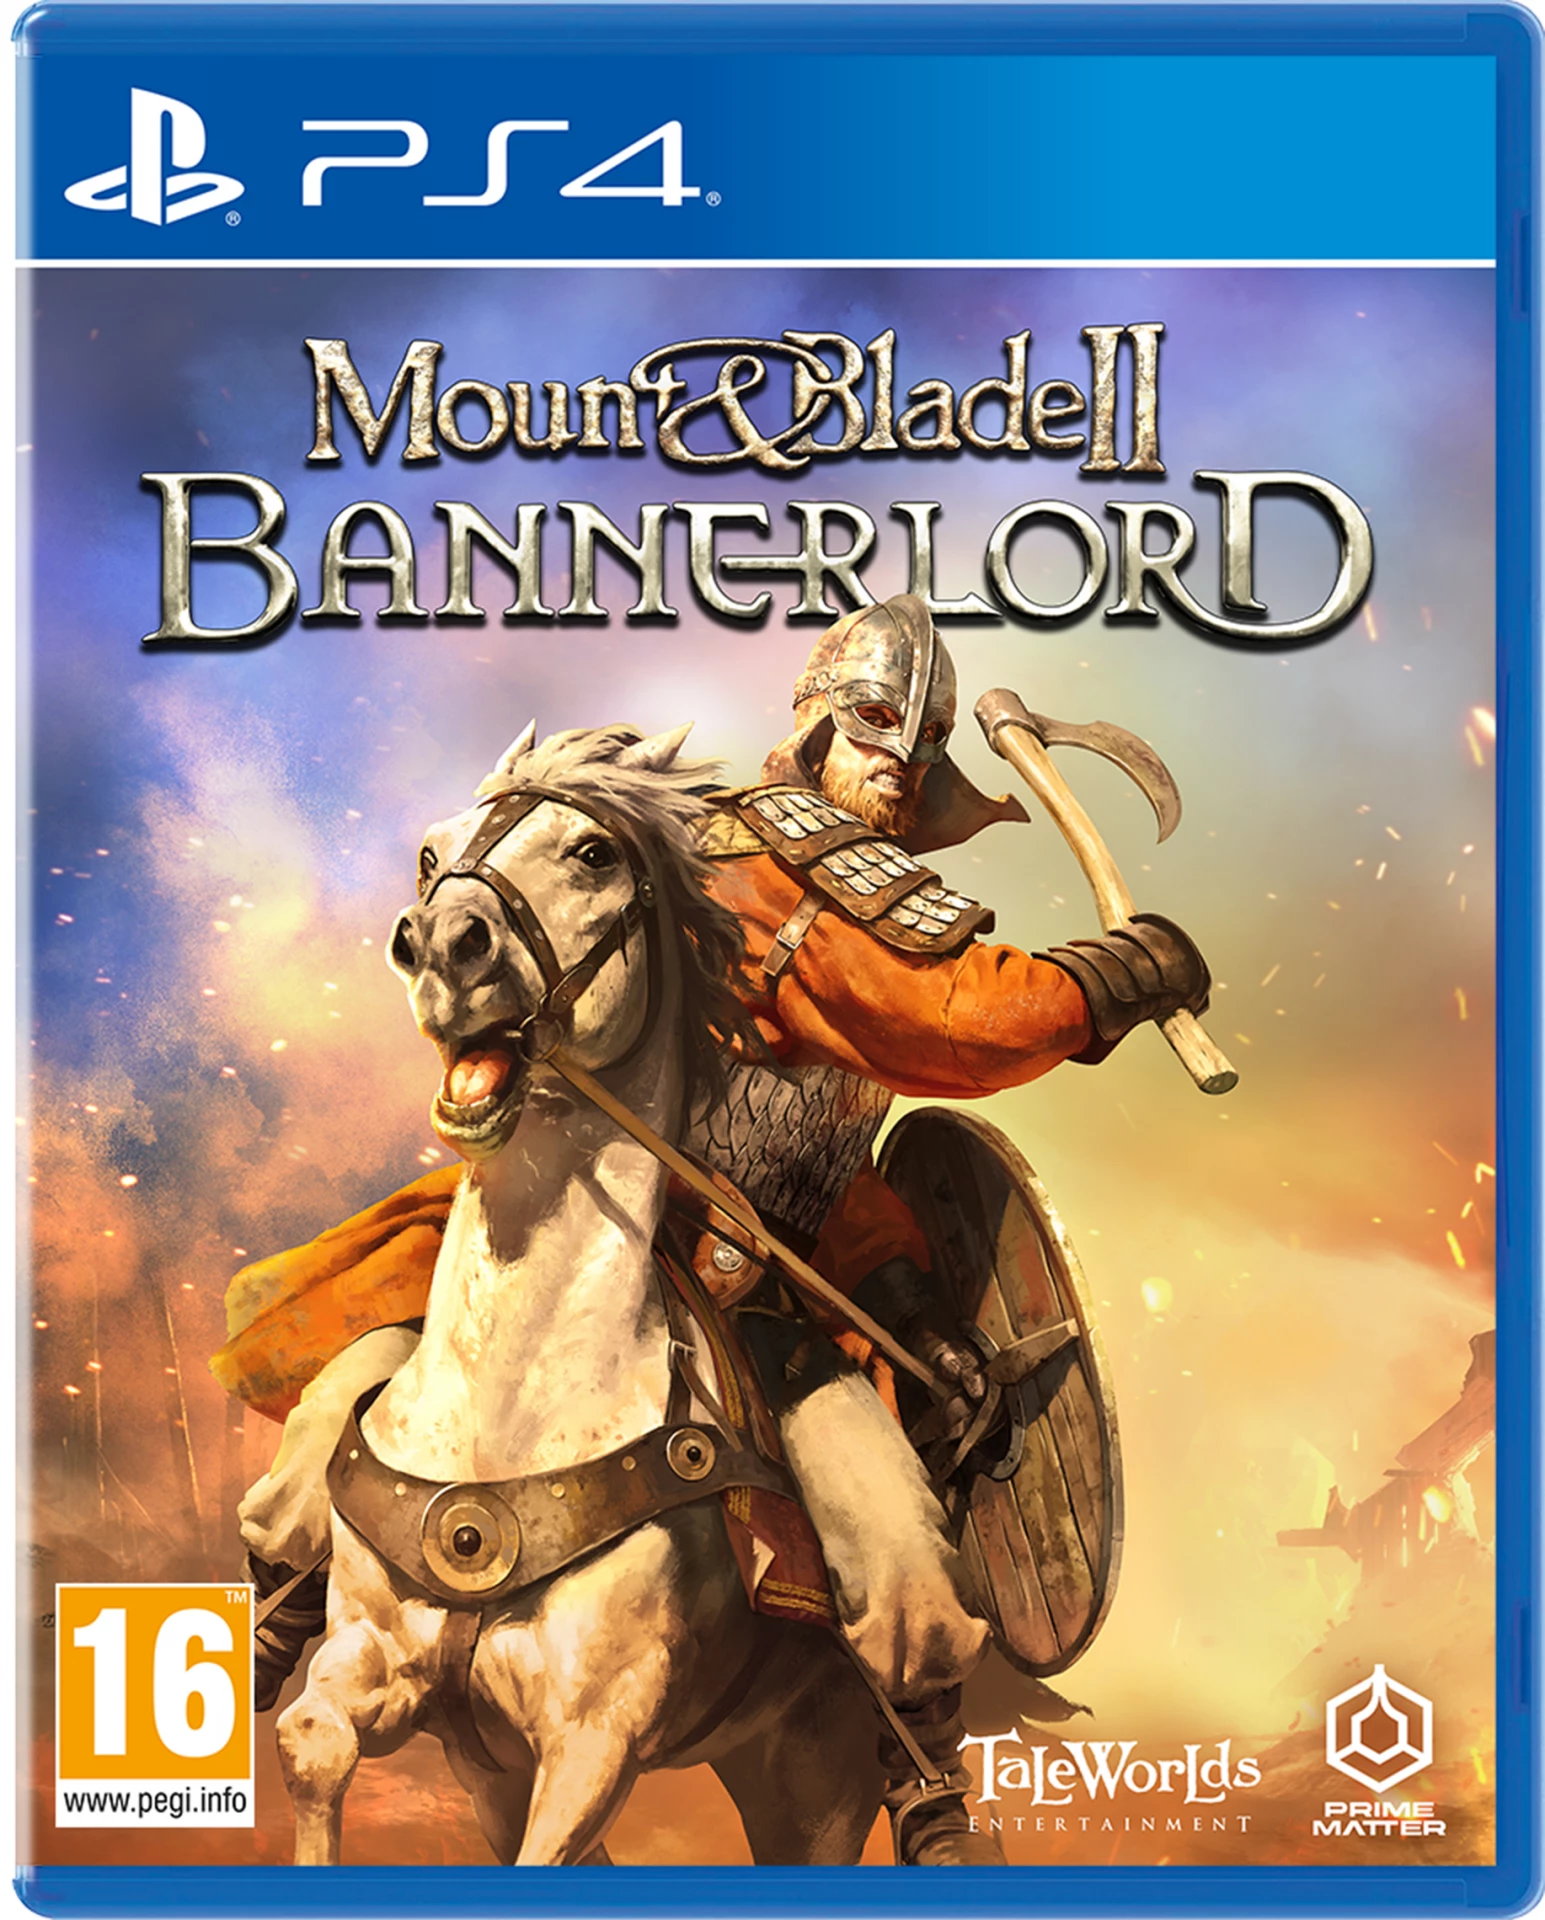 Mount & Blade 2: Bannerlord (PS4), Taleworlds Entertainment